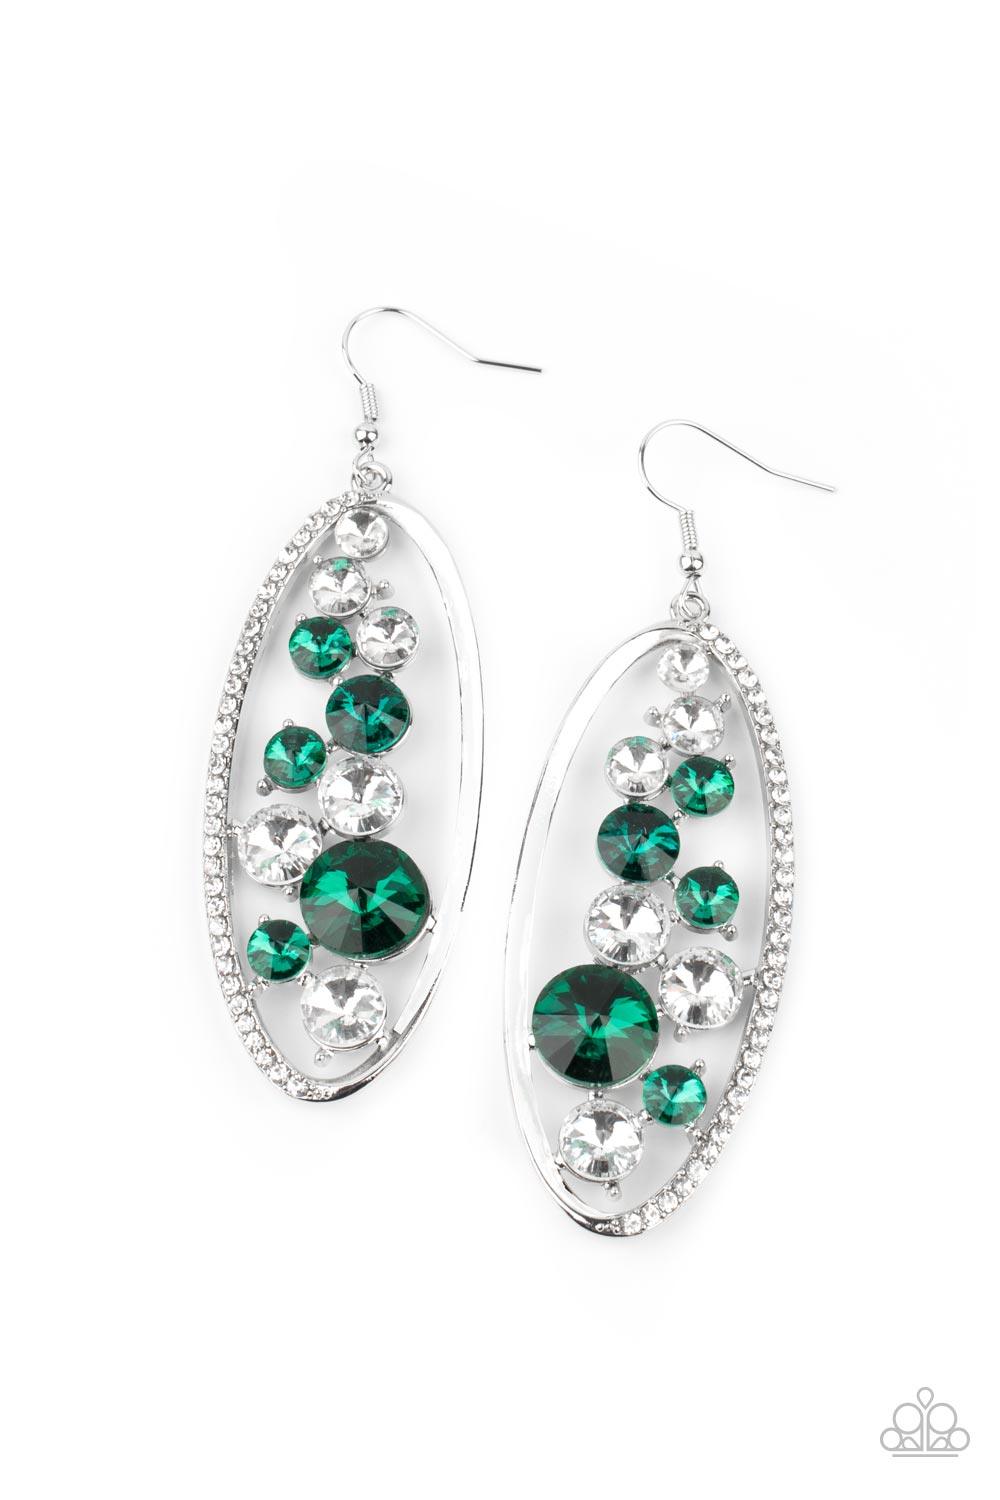 Paparazzi Accessories Rock Candy Bubbly - Green An oversized collection of glassy white and glittery green rhinestones sparkle inside a silver oval frame. One side of the frame is encrusted in dainty white rhinestones, adding a refined flair to the bubbly